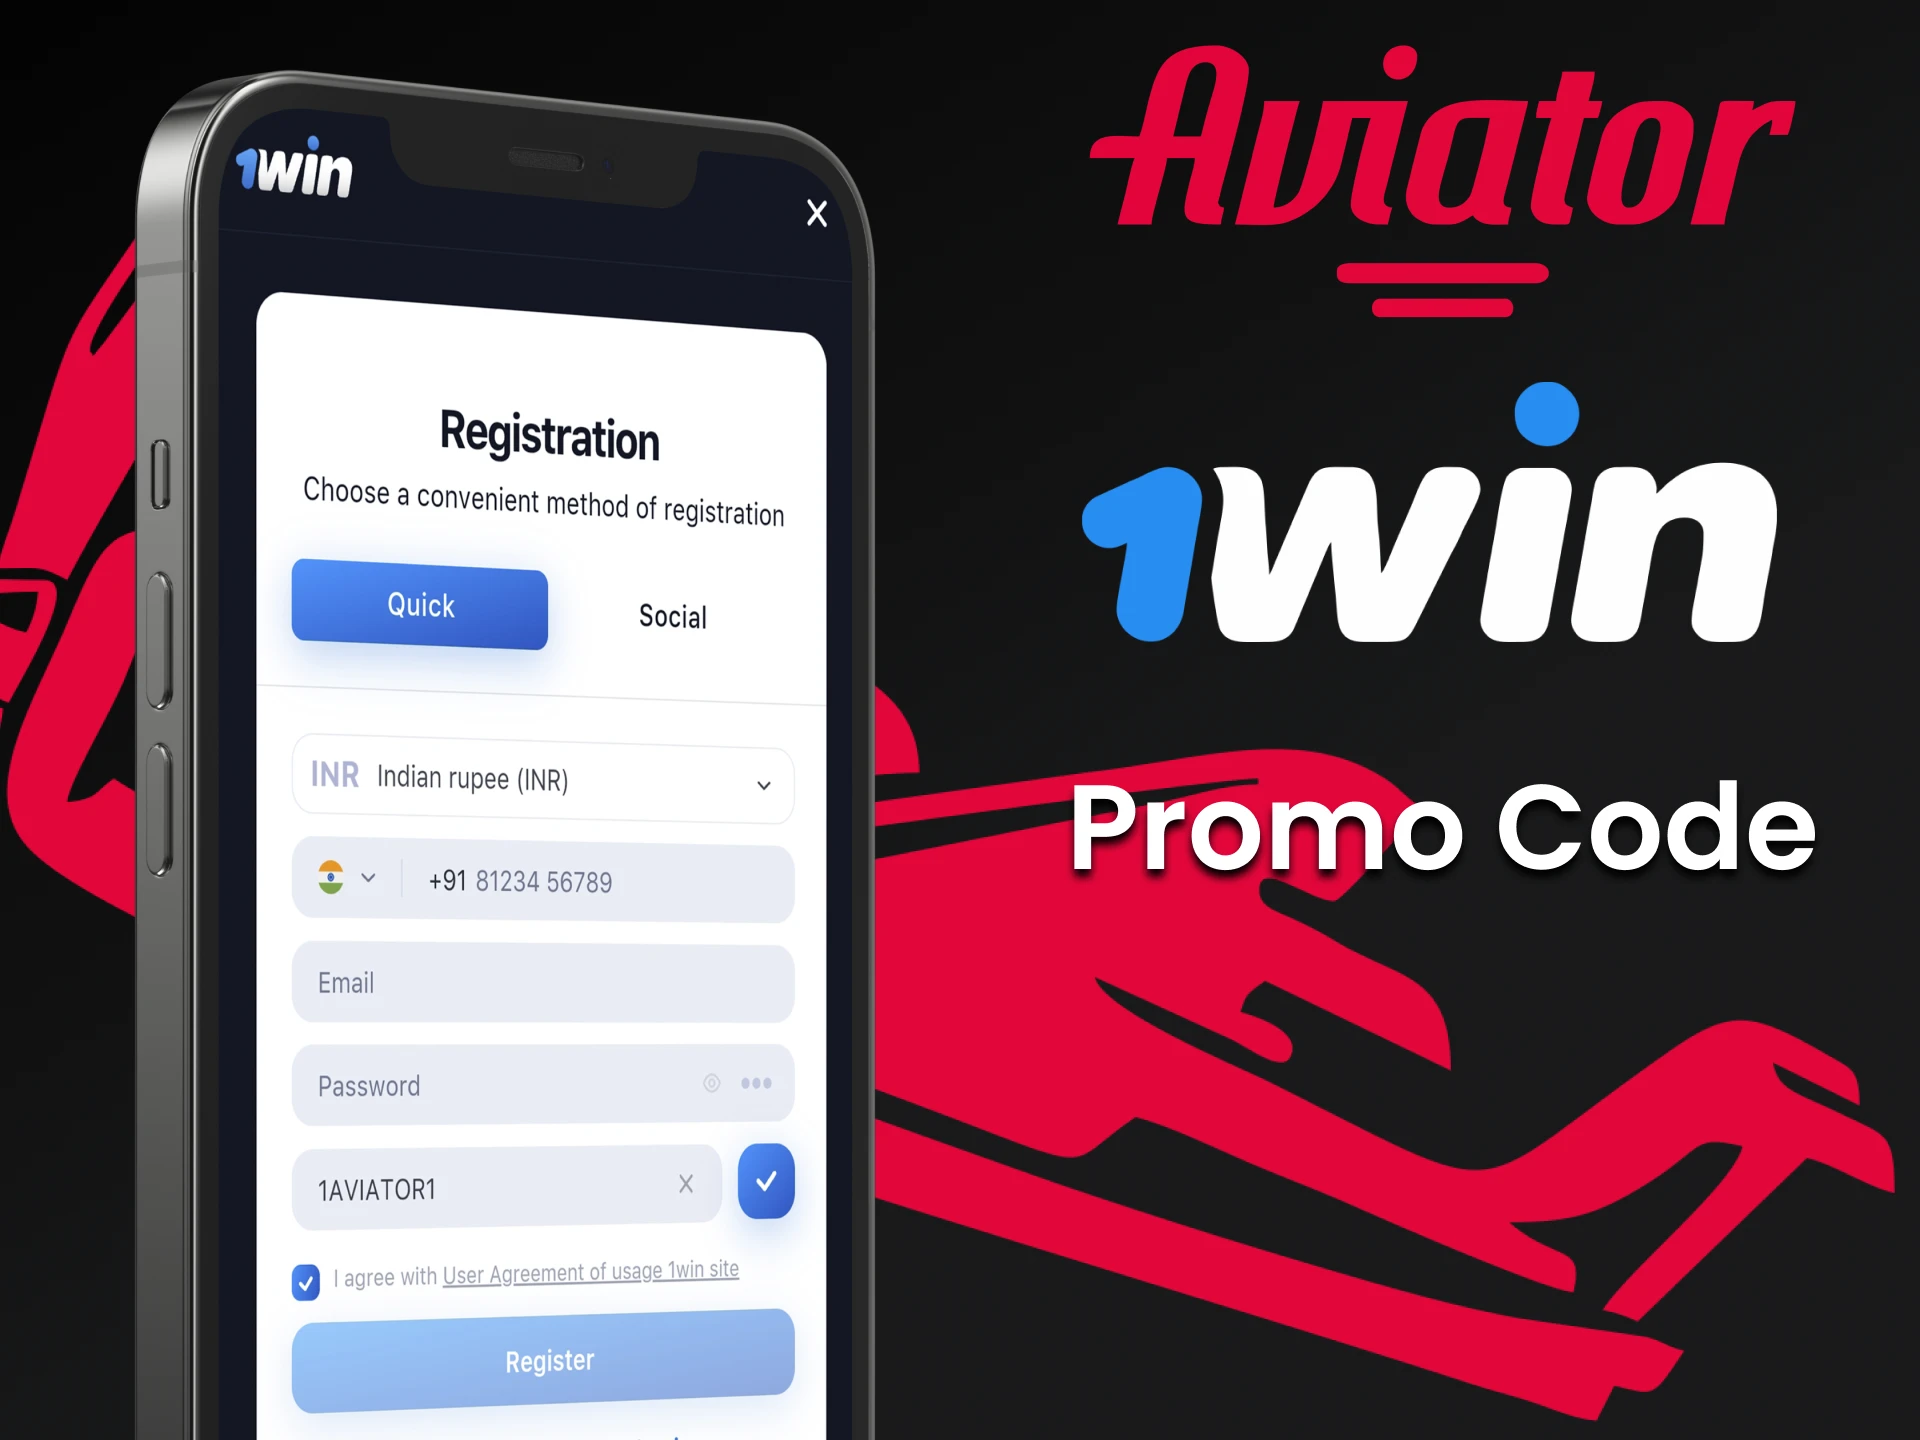 Use a special promo code from 1win to play Aviator.